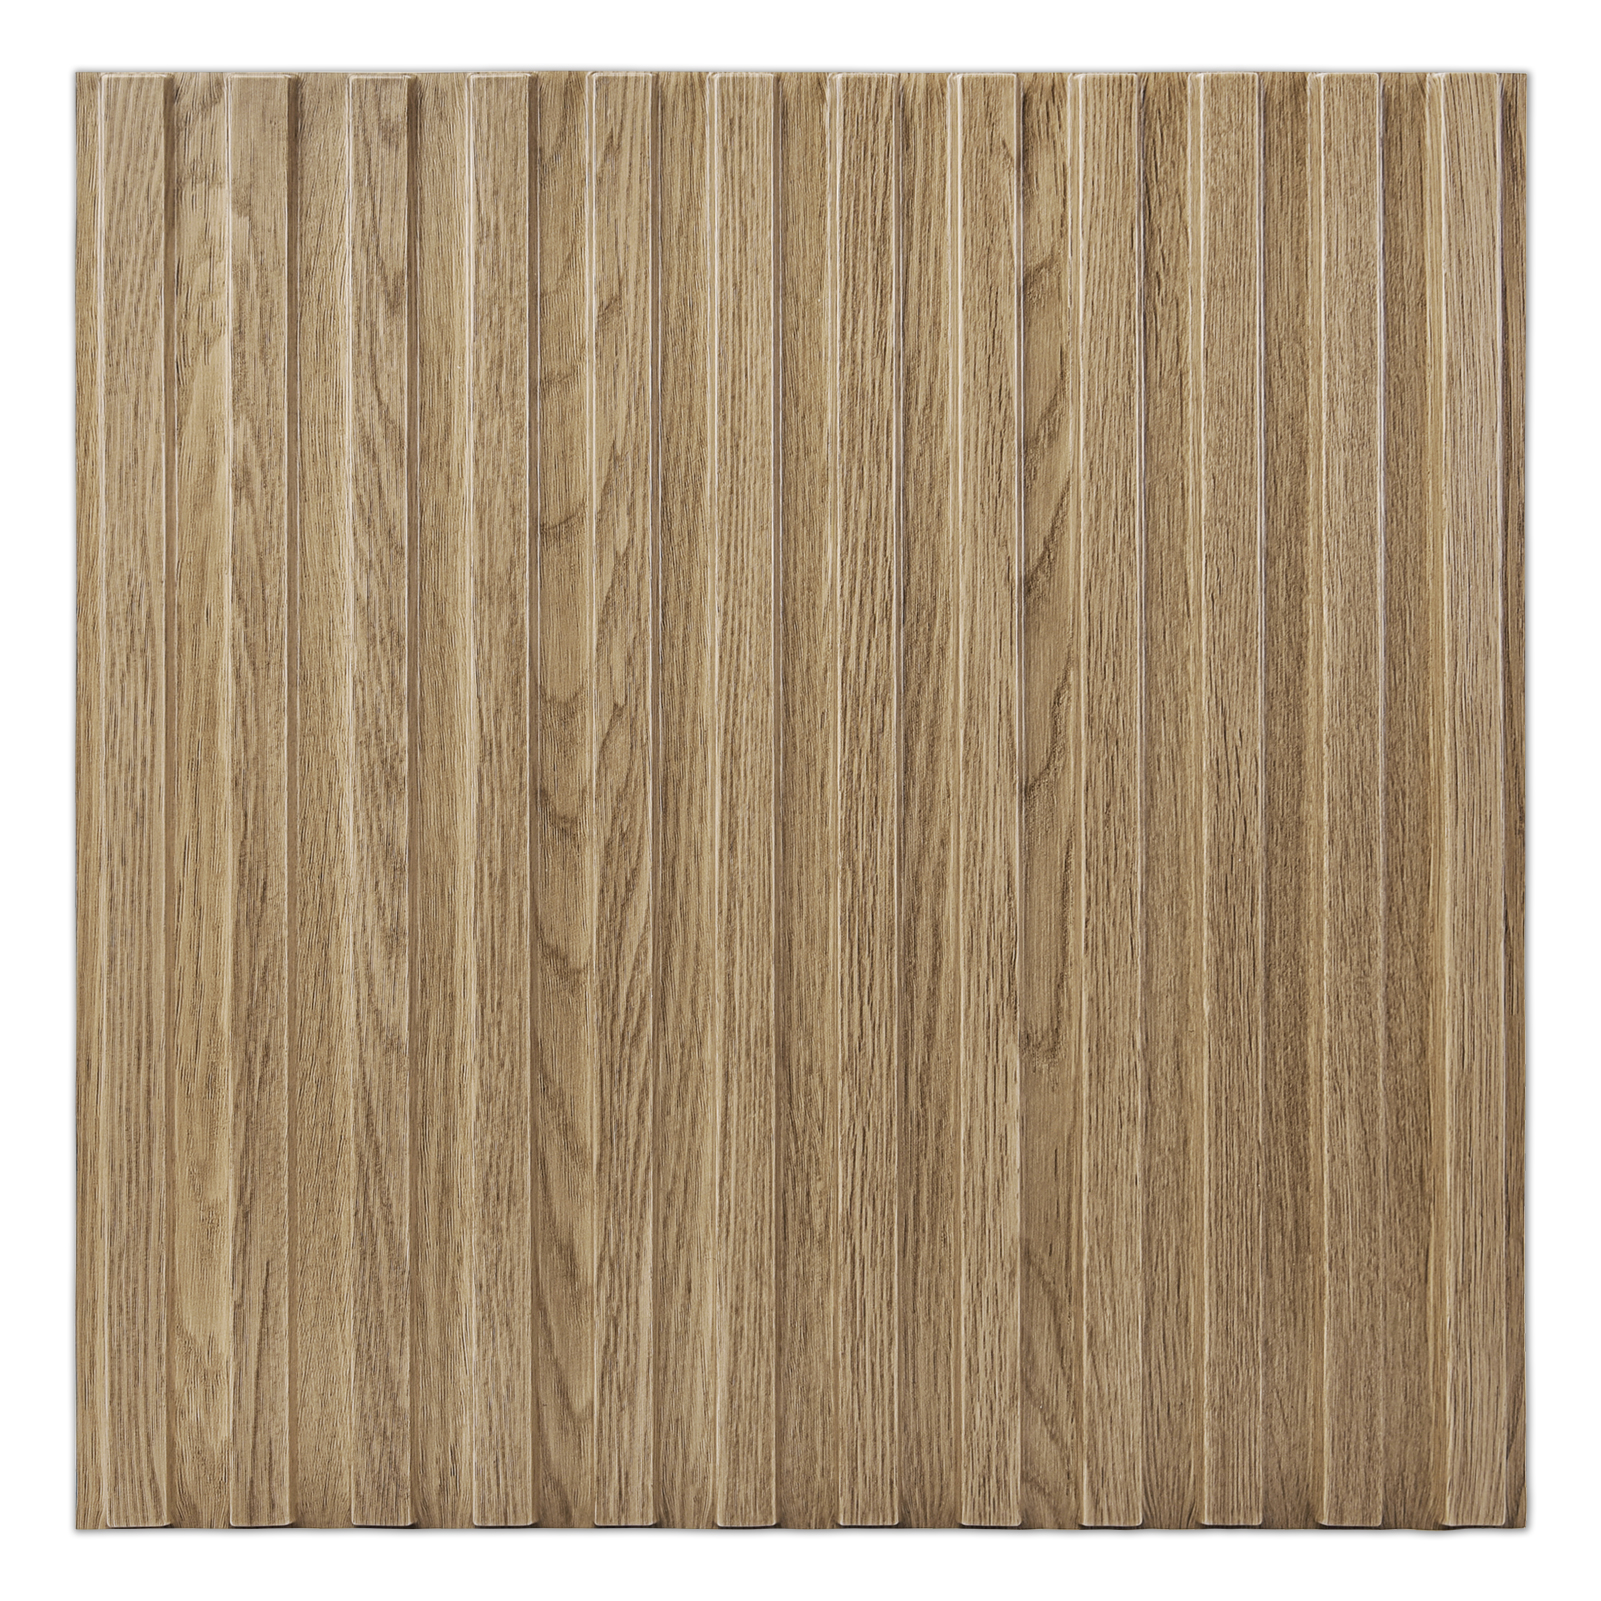 A10064WL-Art3d Slat Wall Panel, 3D Fluted Textured Panel 12-Tile 19.7 x 19.7in.